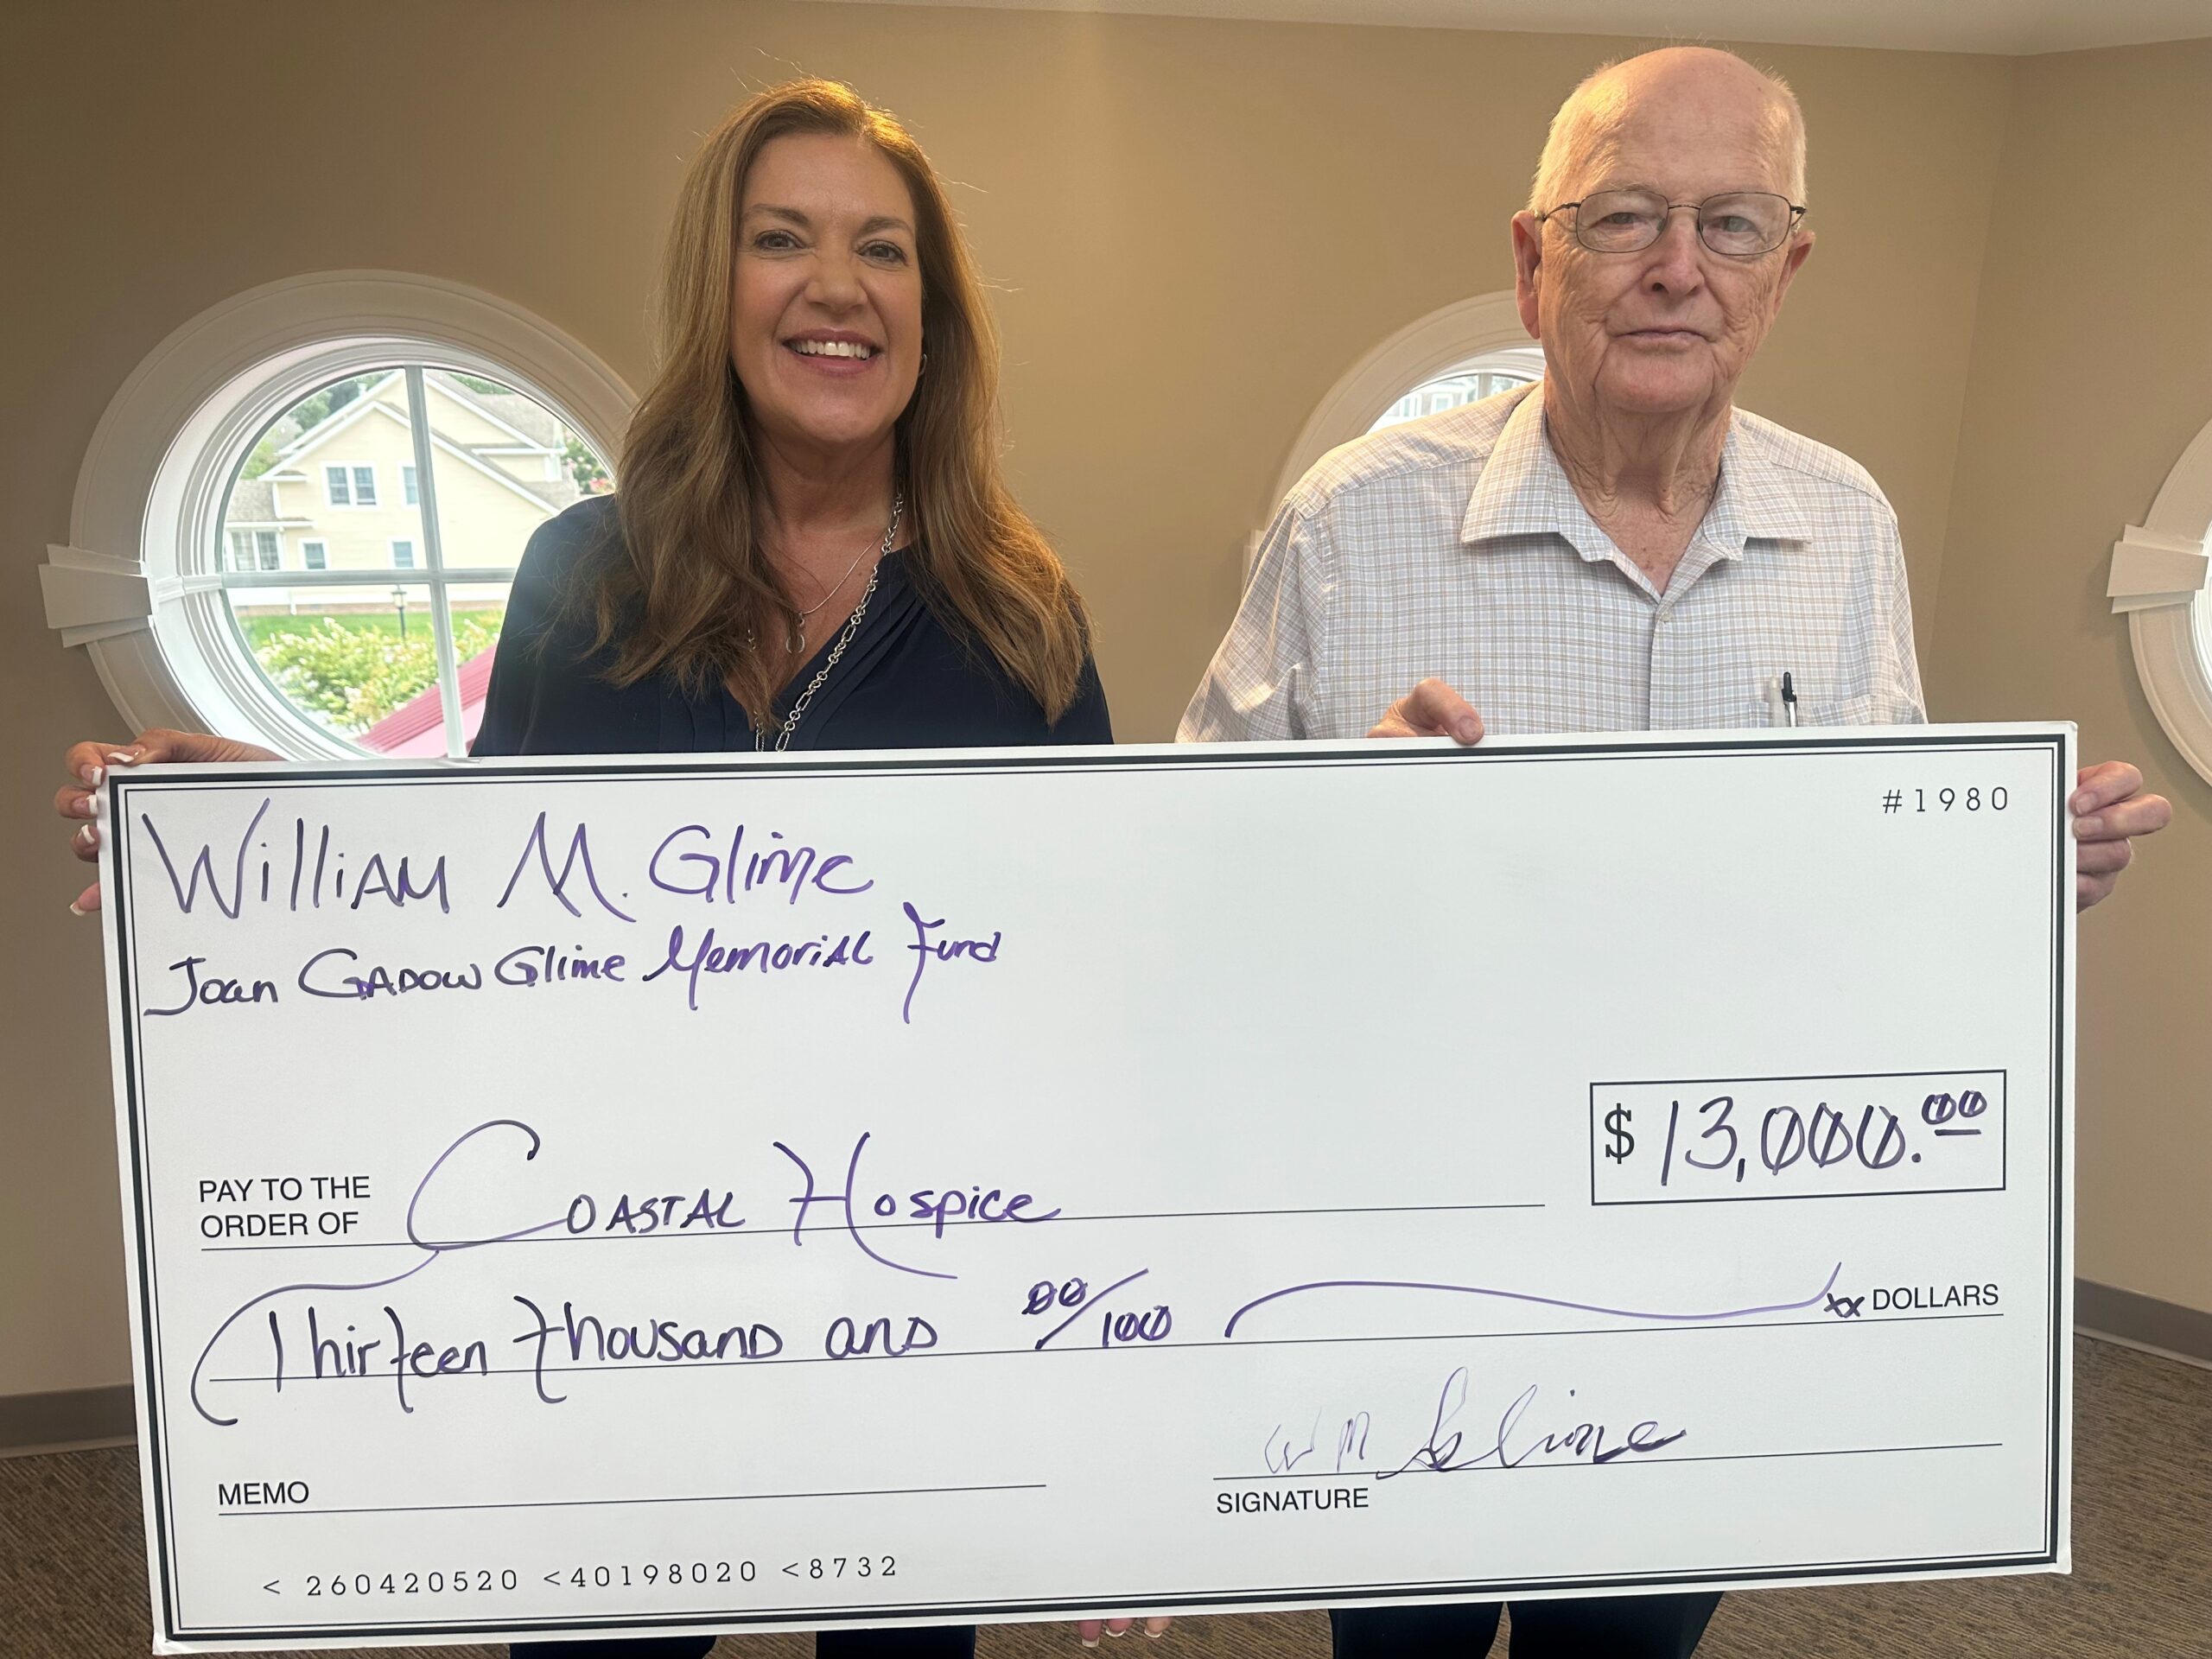 The Macky & Pam Stansell House of Coastal Hospice Receives $13,000 Donation In Memory of Joan Gadow Glime from the JGG Memorial Fund